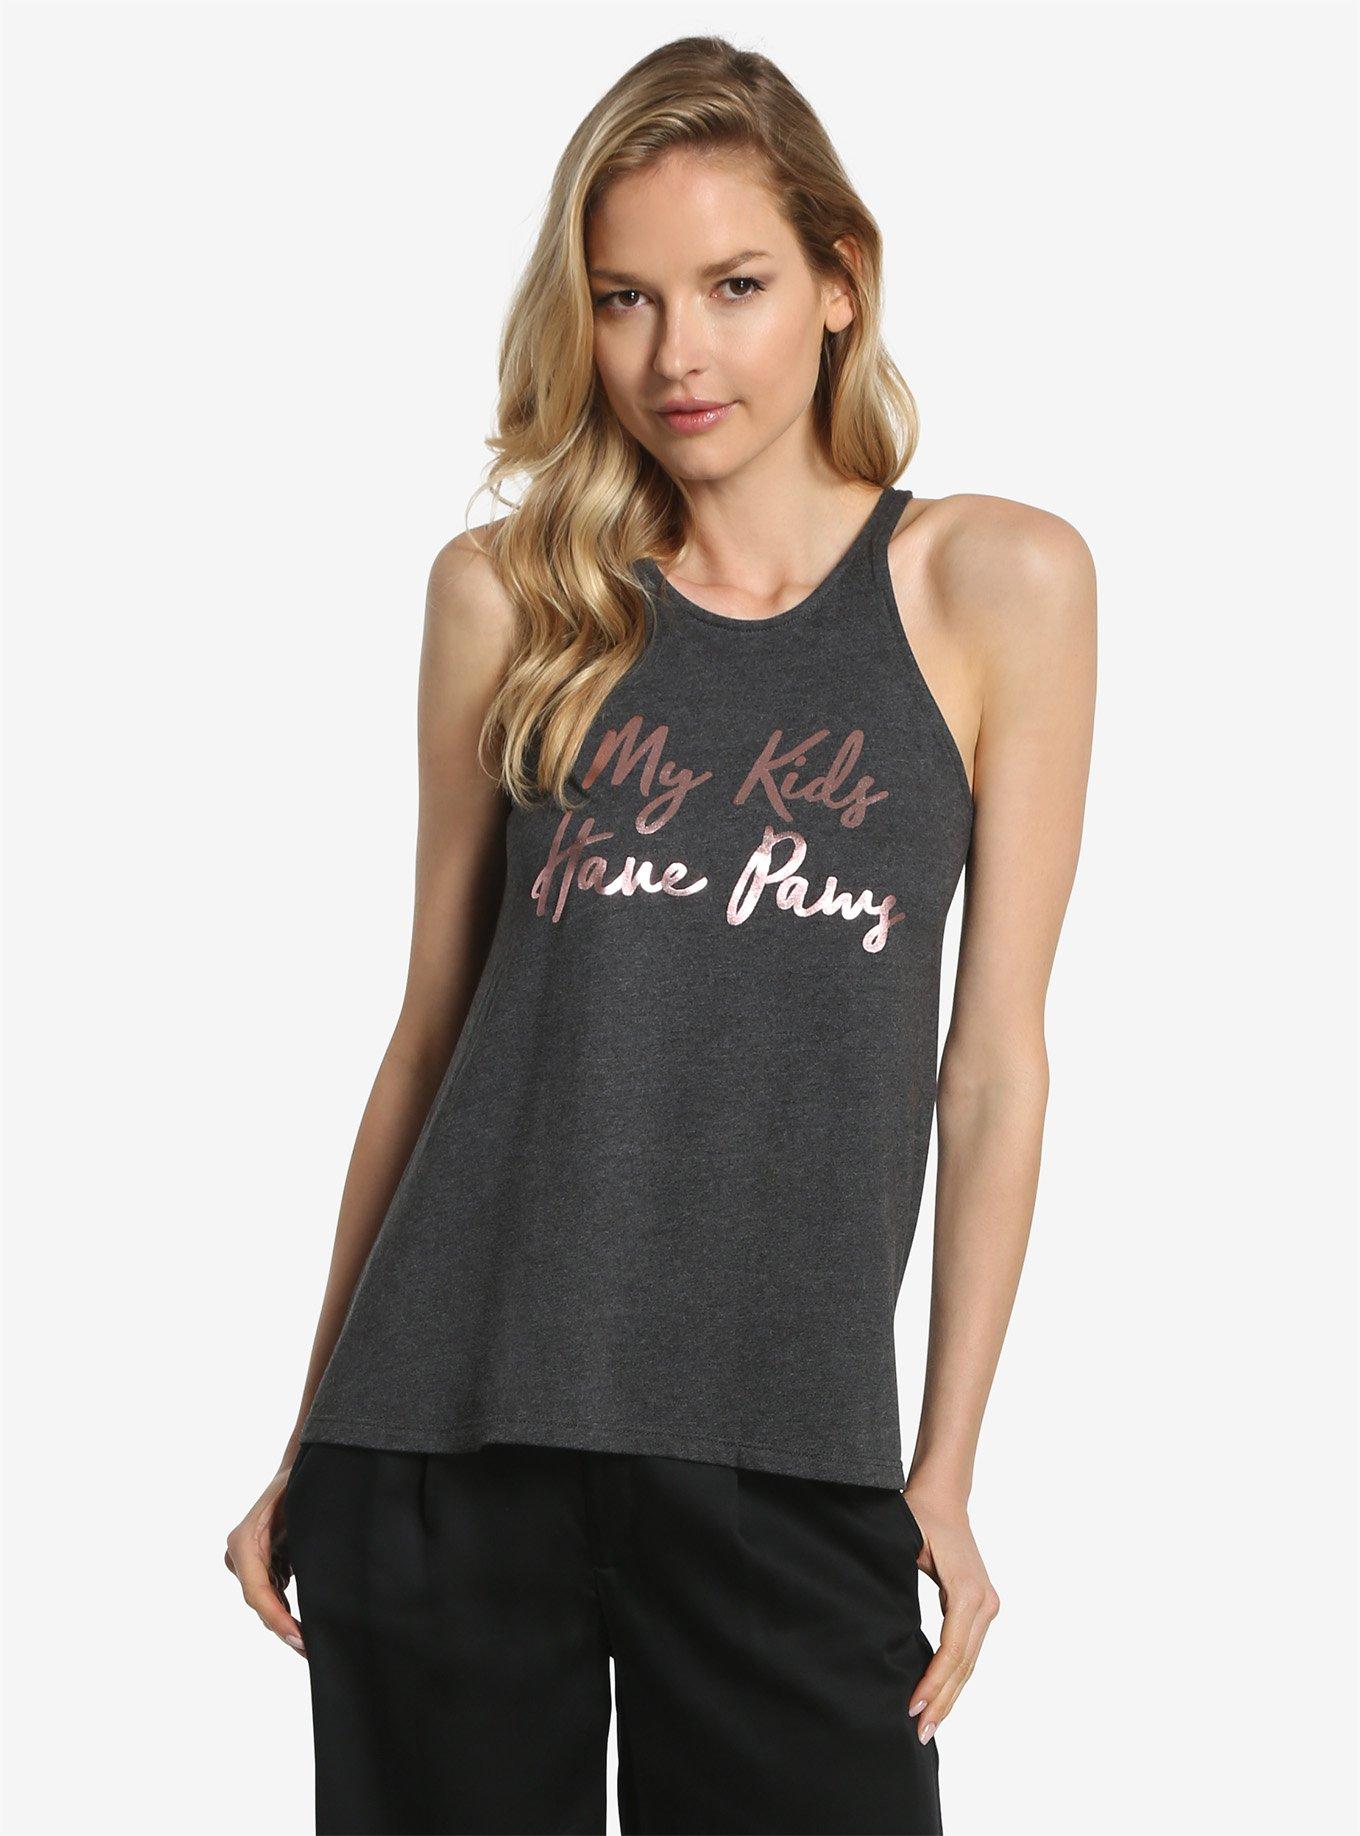 My Kids Have Paws Womens Tank Top, GREY, hi-res